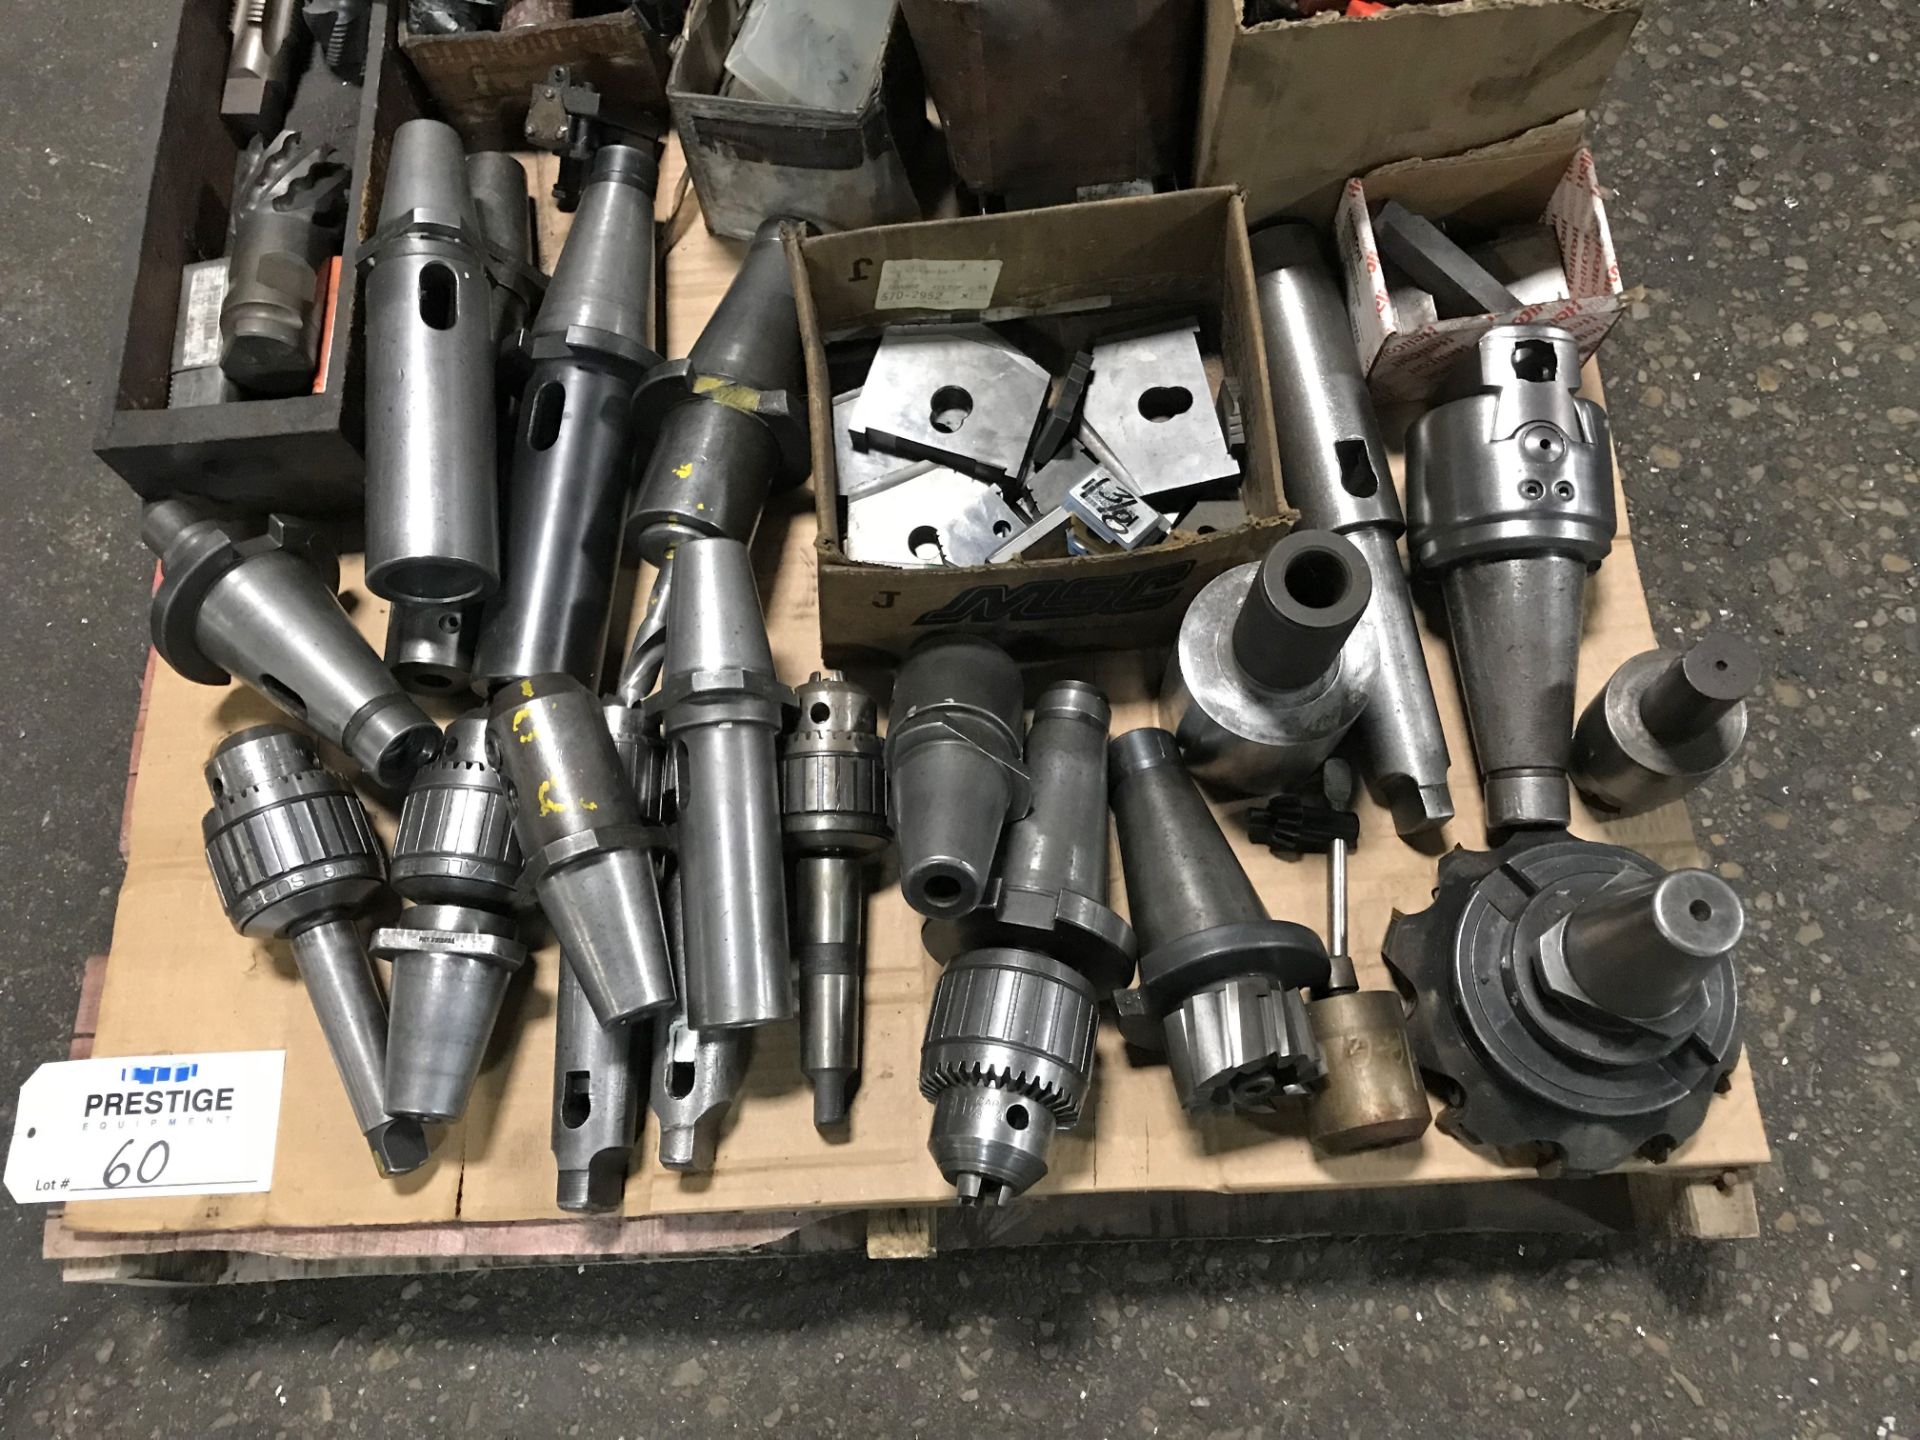 Skid of Assorted Tool Holders, Drill Bits and Tooling - Image 2 of 3